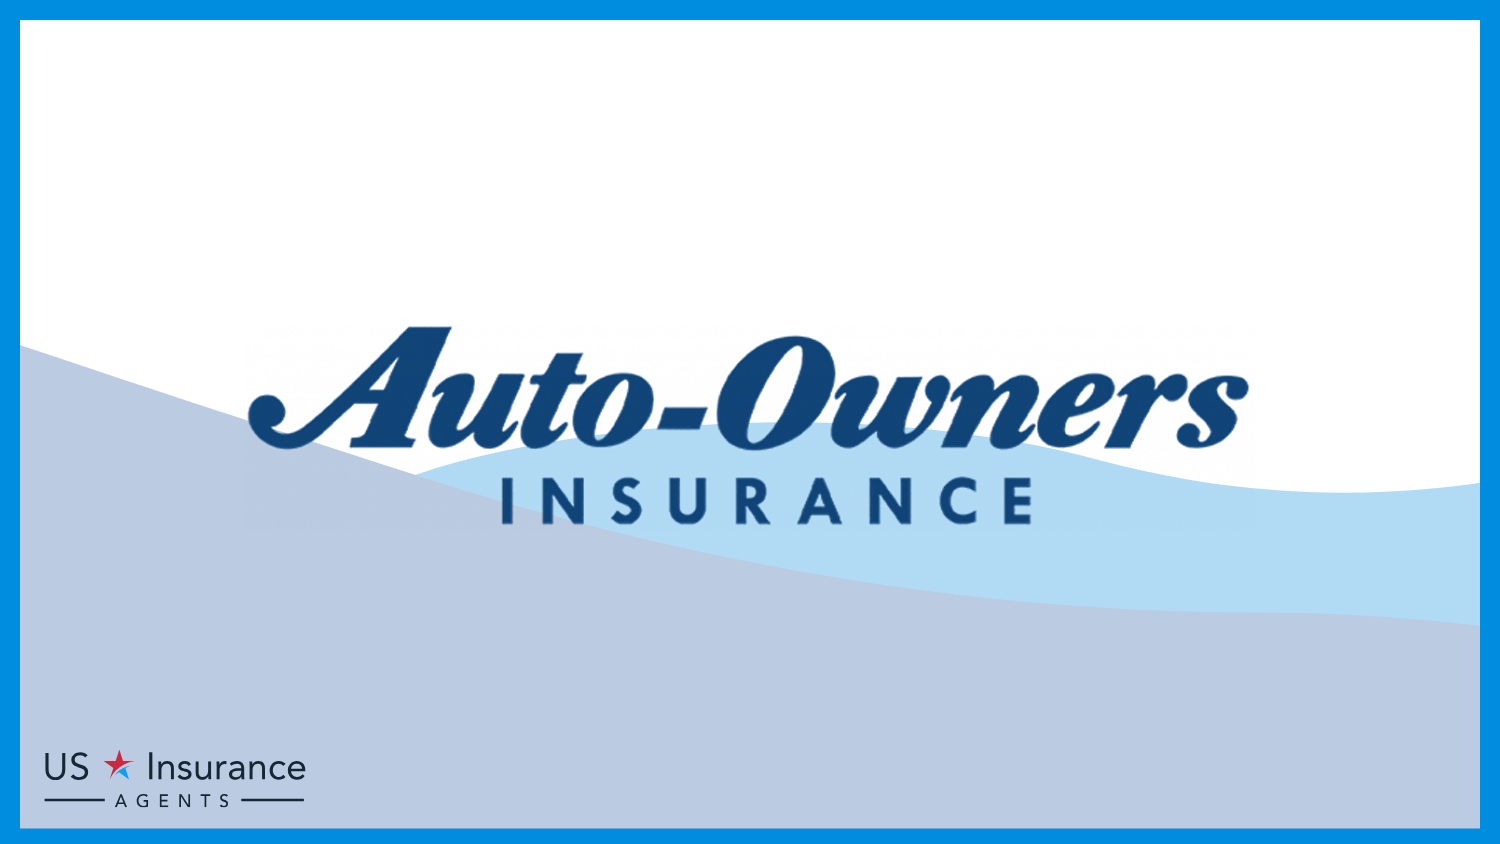 Auto-Owners: Best Business Insurance for Social Media Influencers